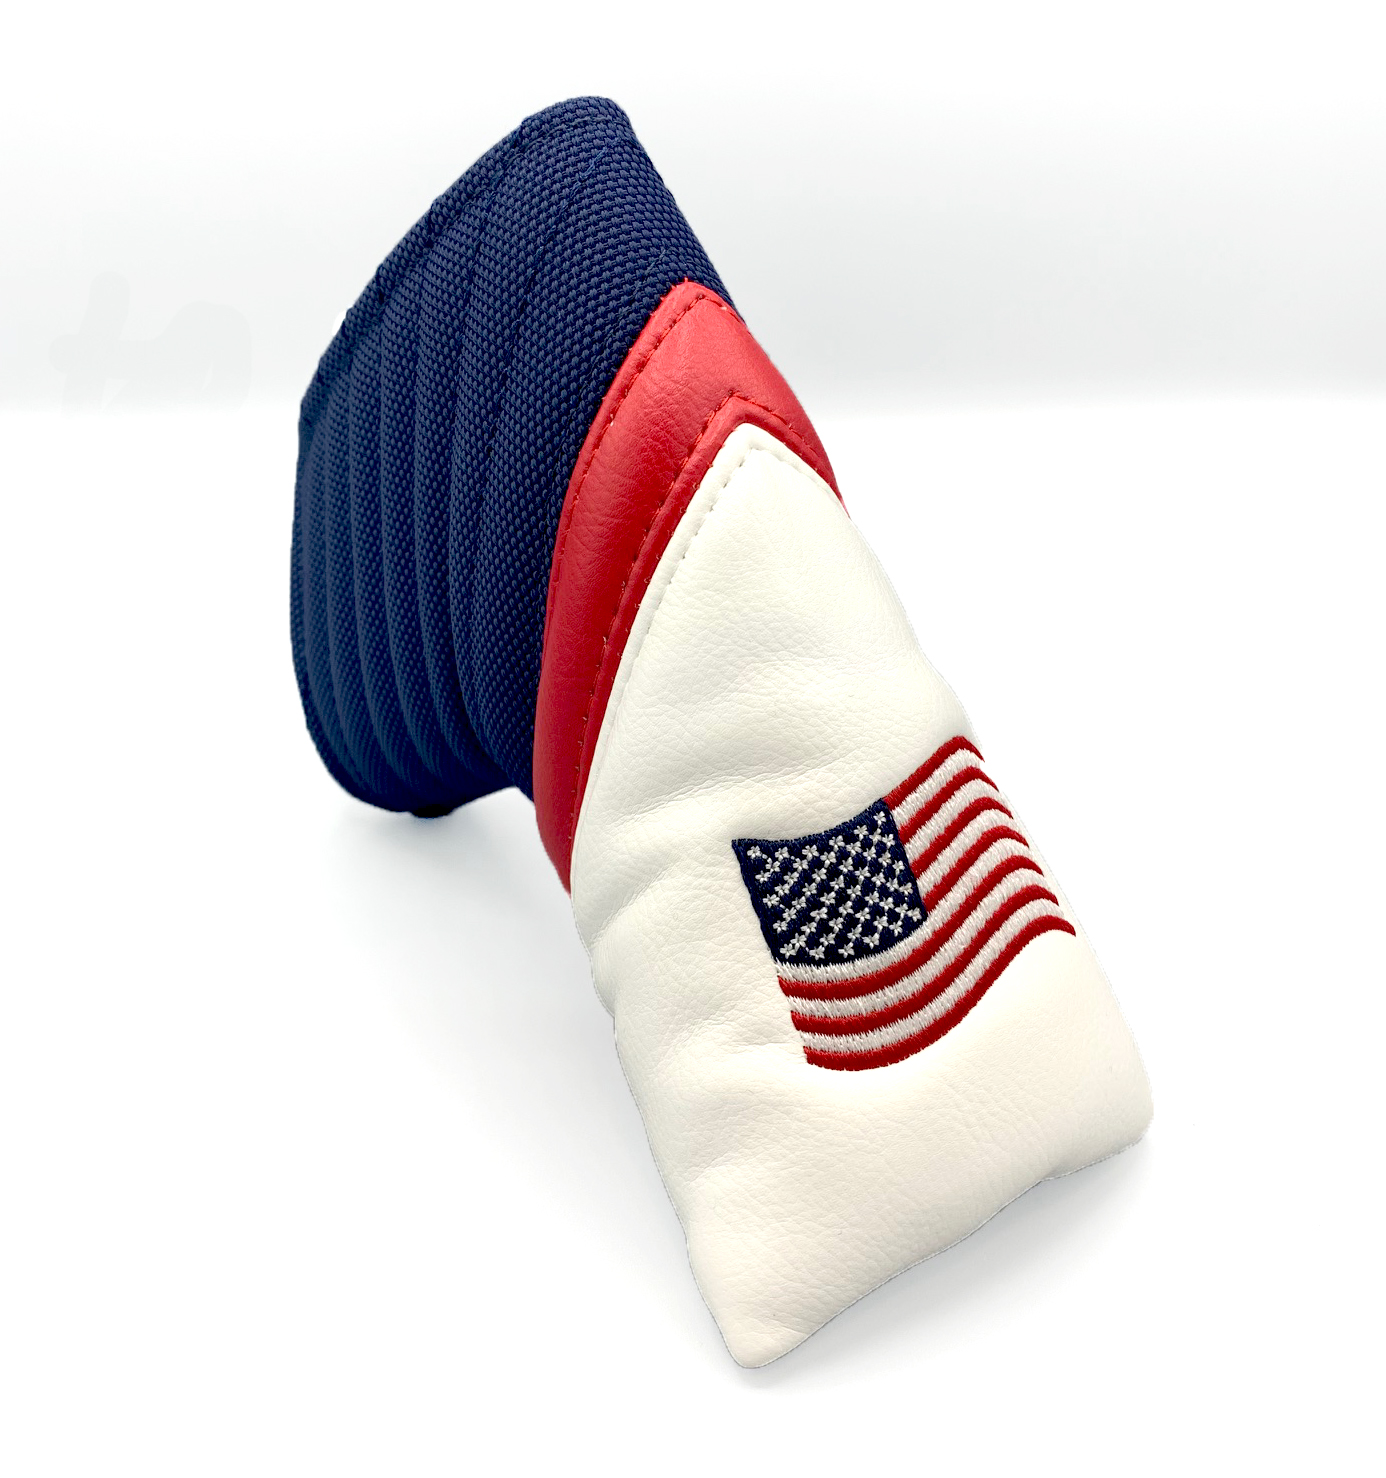 Backspin Waving Flag Fusion Blade Putter Headcover